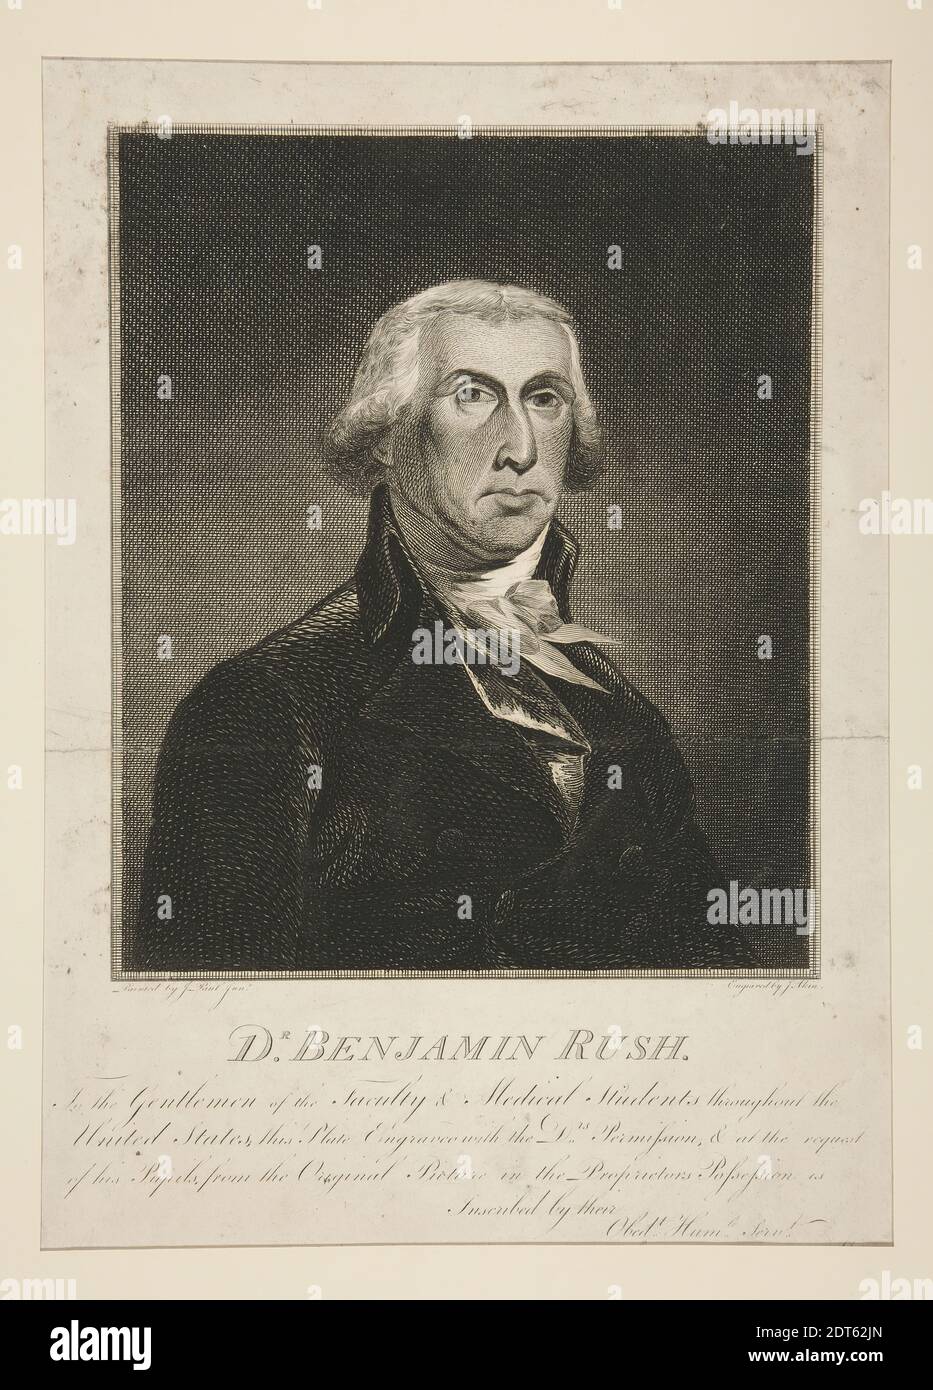 Engraver: James Akin, American, ca. 1773–1846, After: Jeremiah Paul, American, 1775/76–1820, Dr. Benjamin Rush, March 20, 1800, Etching and engraving, sheet: 27.3 × 20 cm (10 3/4 × 7 7/8 in.), Made in United States, American, 19th century, Works on Paper - Prints Stock Photo